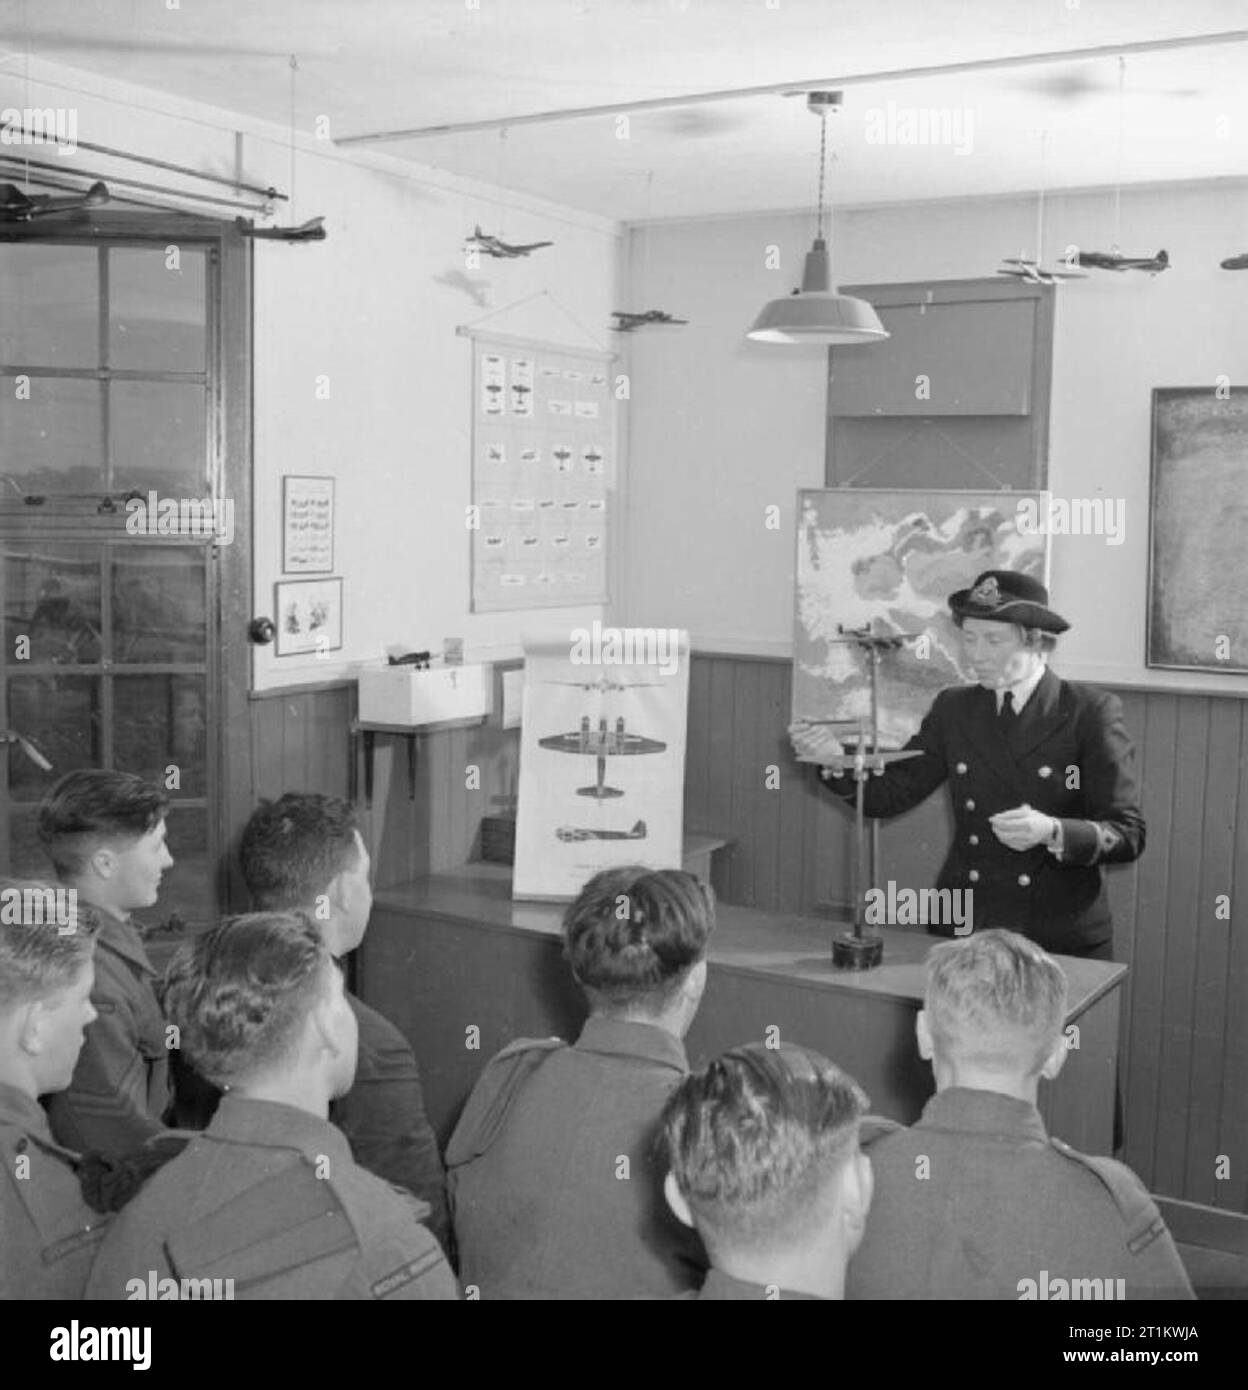 Women's Royal Naval Service- With the Fleet Air Arm, Scotland, 1943 Third Officer Ingledew, WRNS, gives a lecture on aircraft recognition to gunners of the Station Defence. She uses an epidiascope to project pictures of aircraft onto the screen as well as models of aircraft during her daily hour-long lecture. Stock Photo